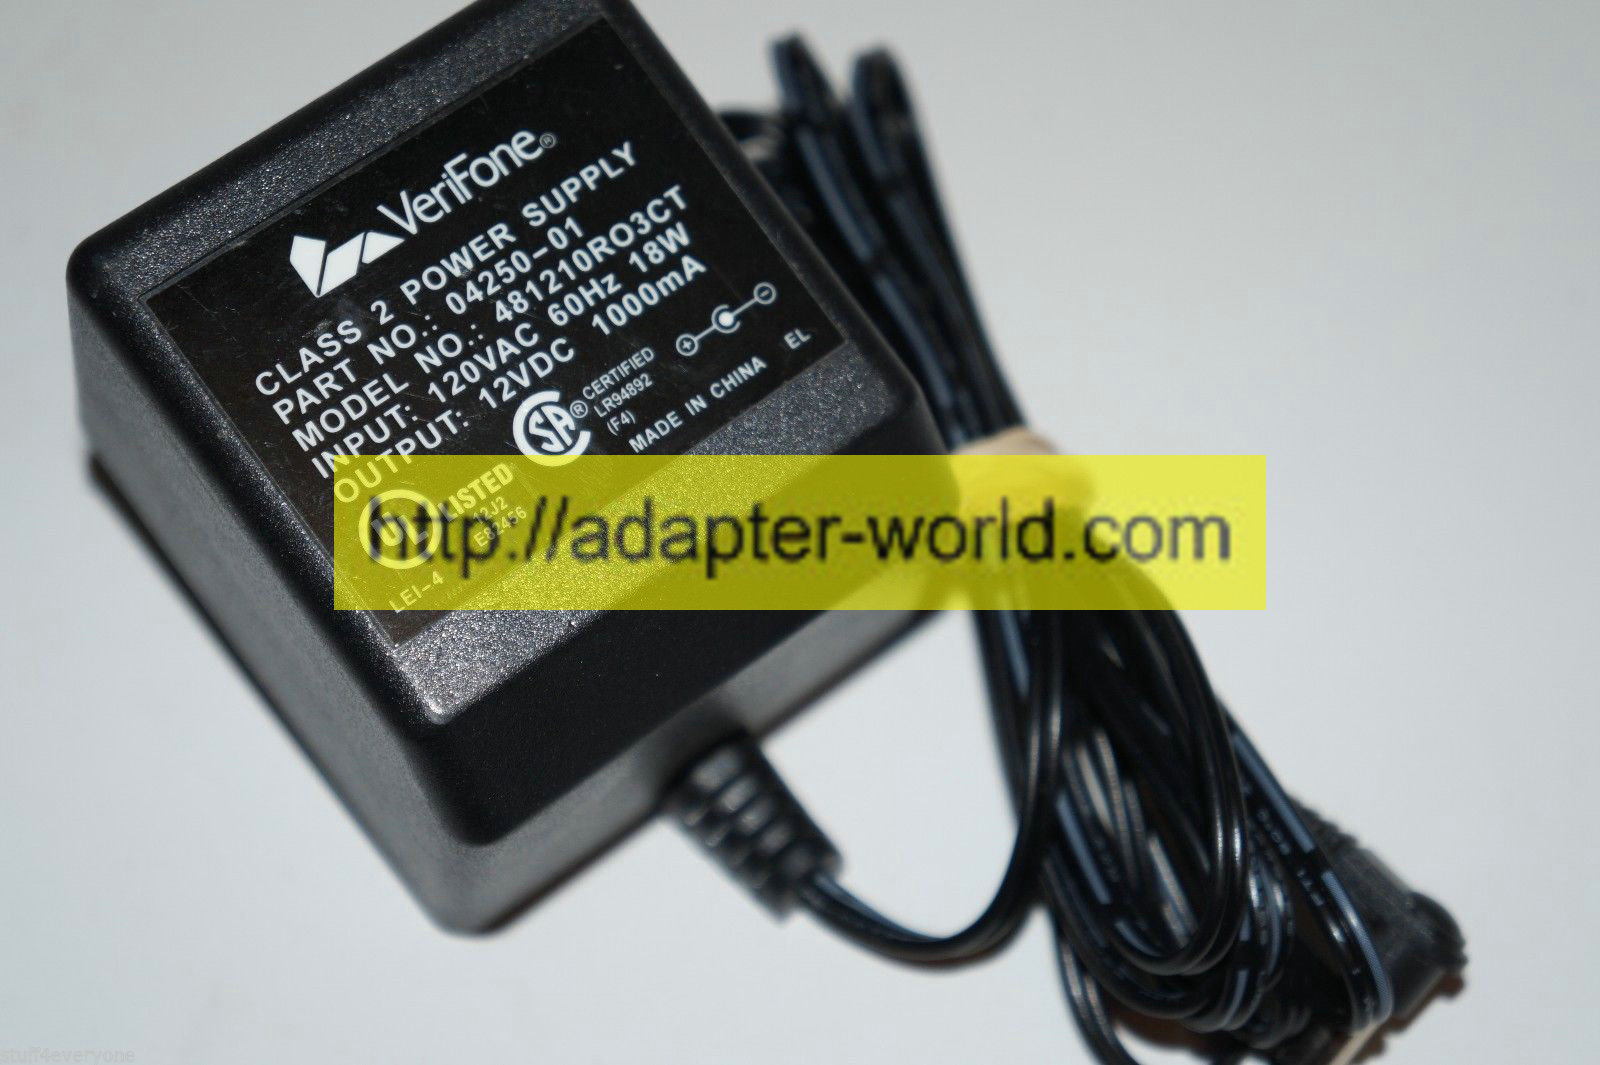 *100% Brand NEW* Verifone 481210RO3CT 04250-01 AC Adapter Wall Charger Power Supply Free shipping!